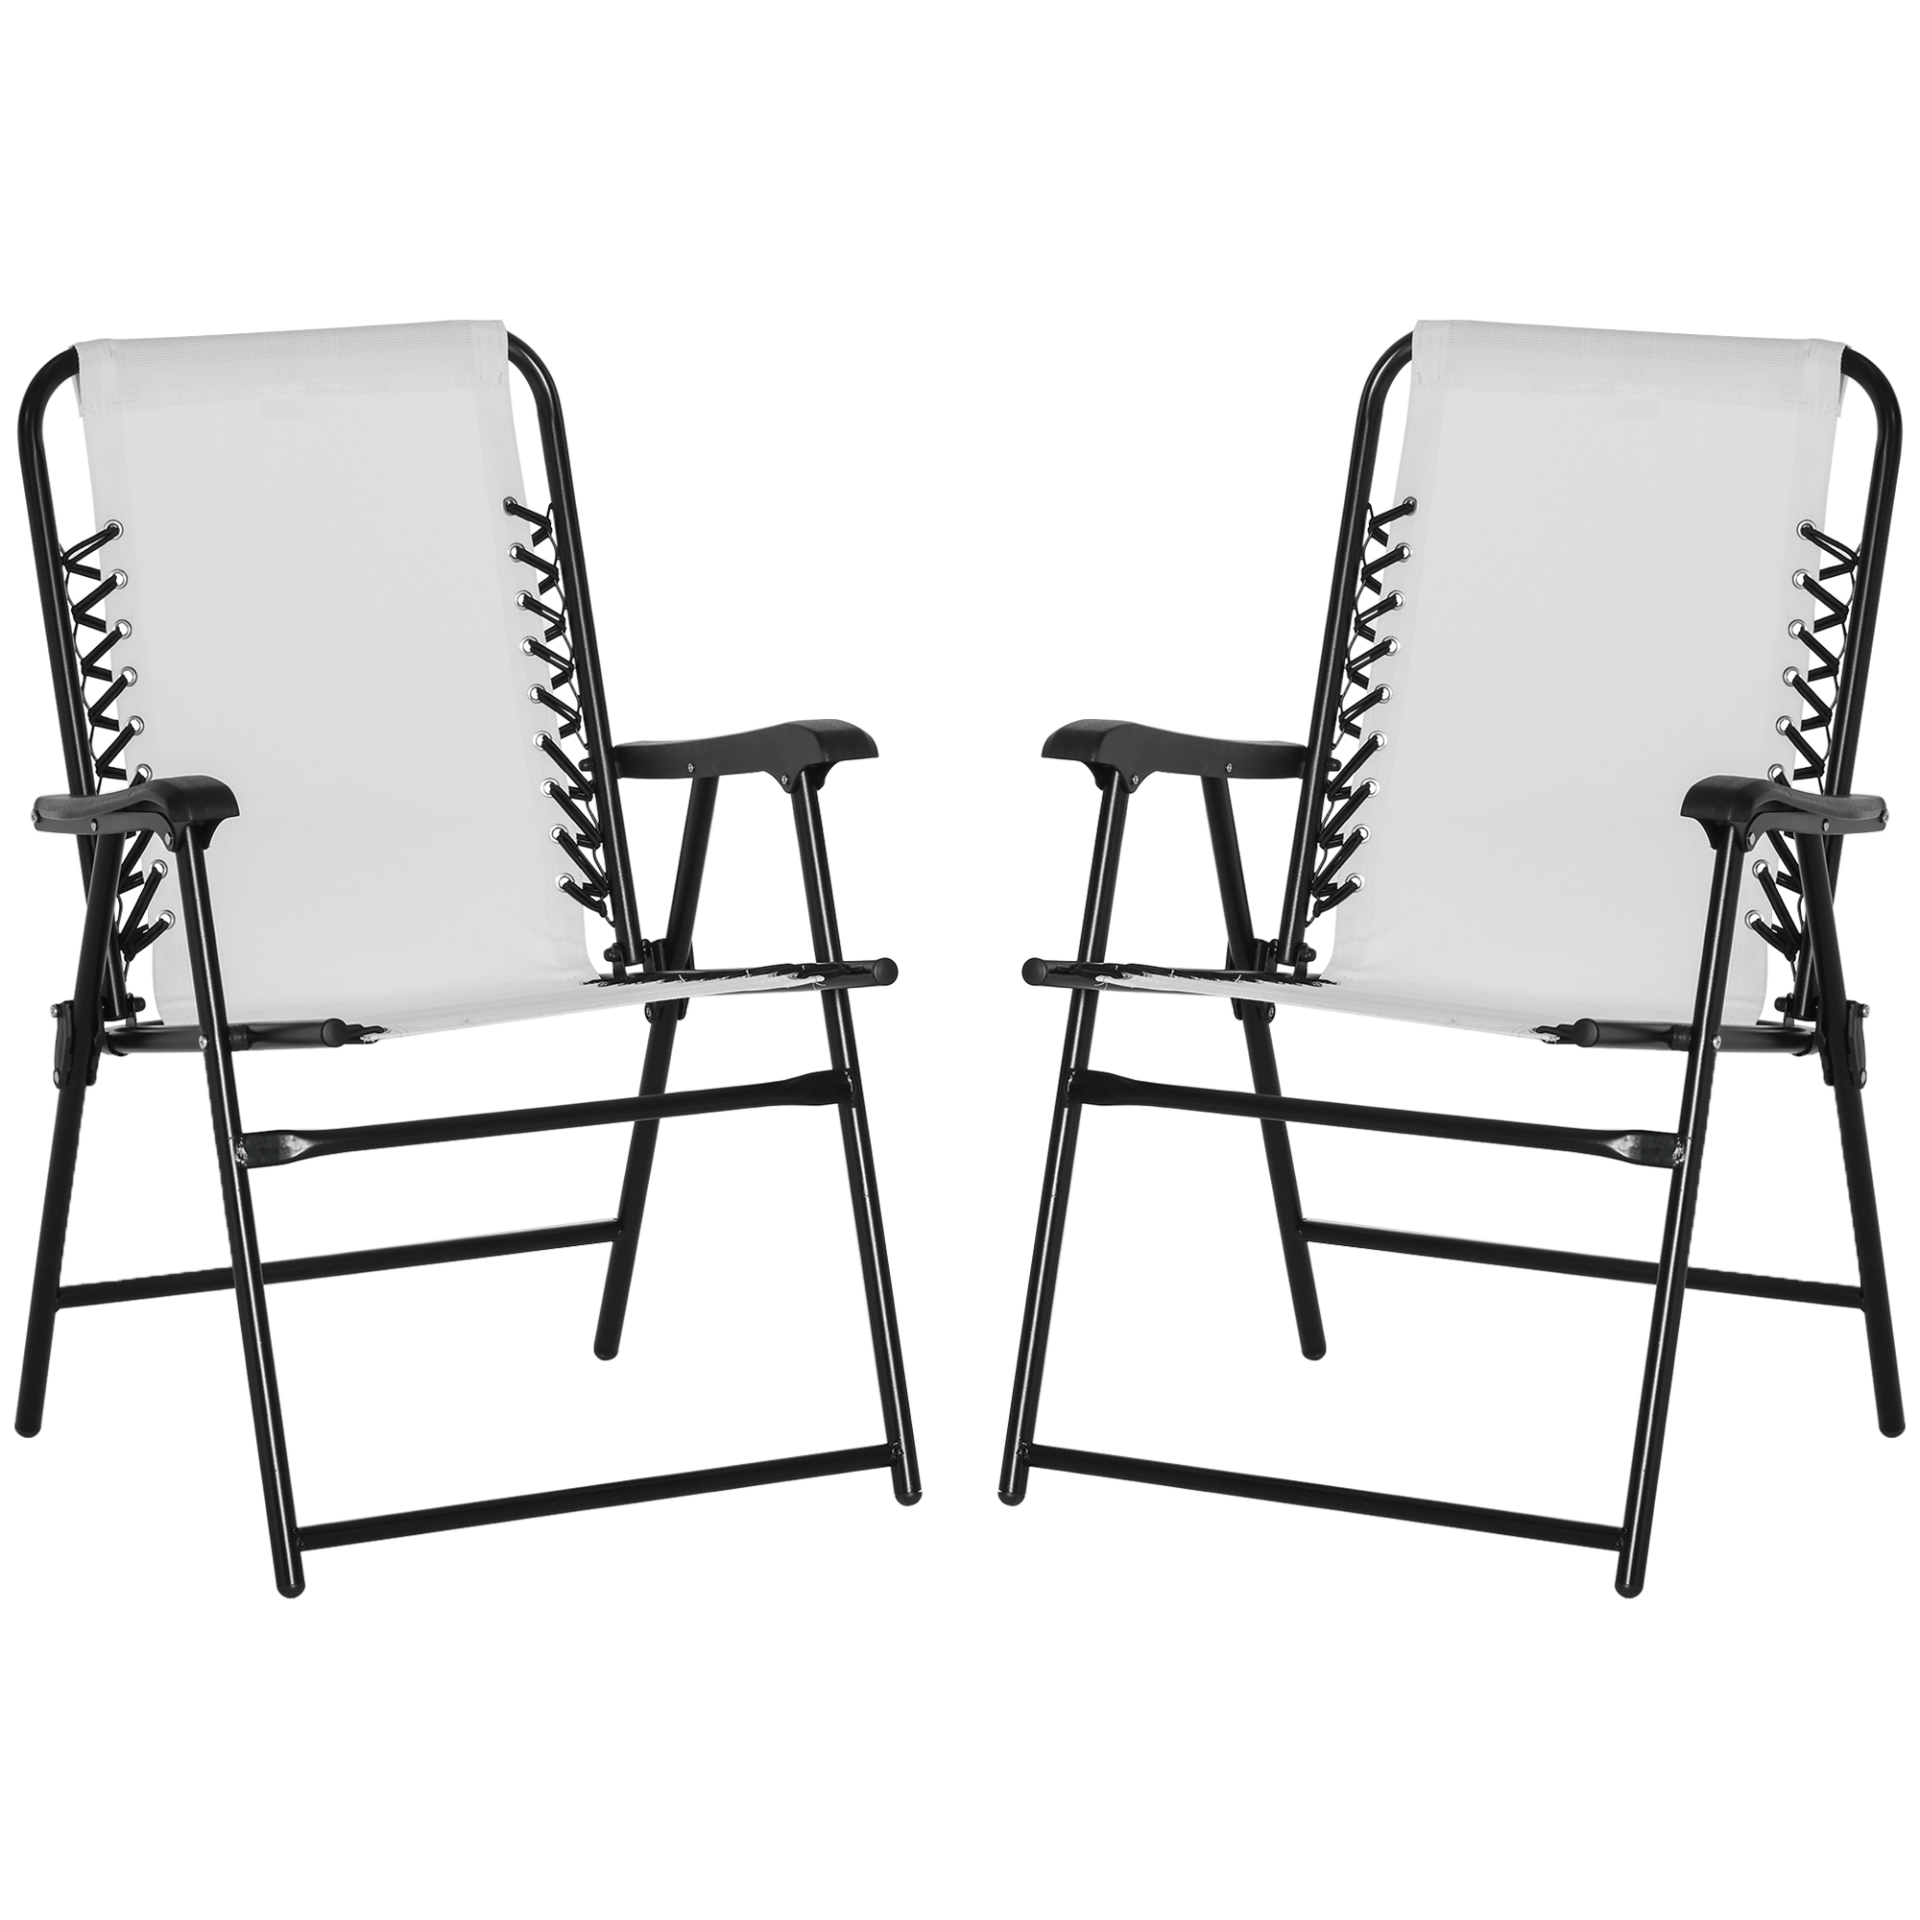 Outsunny Set of 2 Patio Folding Dining Chair Set Garden Outdoor Portable for Camping Pool Beach Deck Lawn with Armrest, Cream White Camping Chair Cosy Camping Co. Cream  